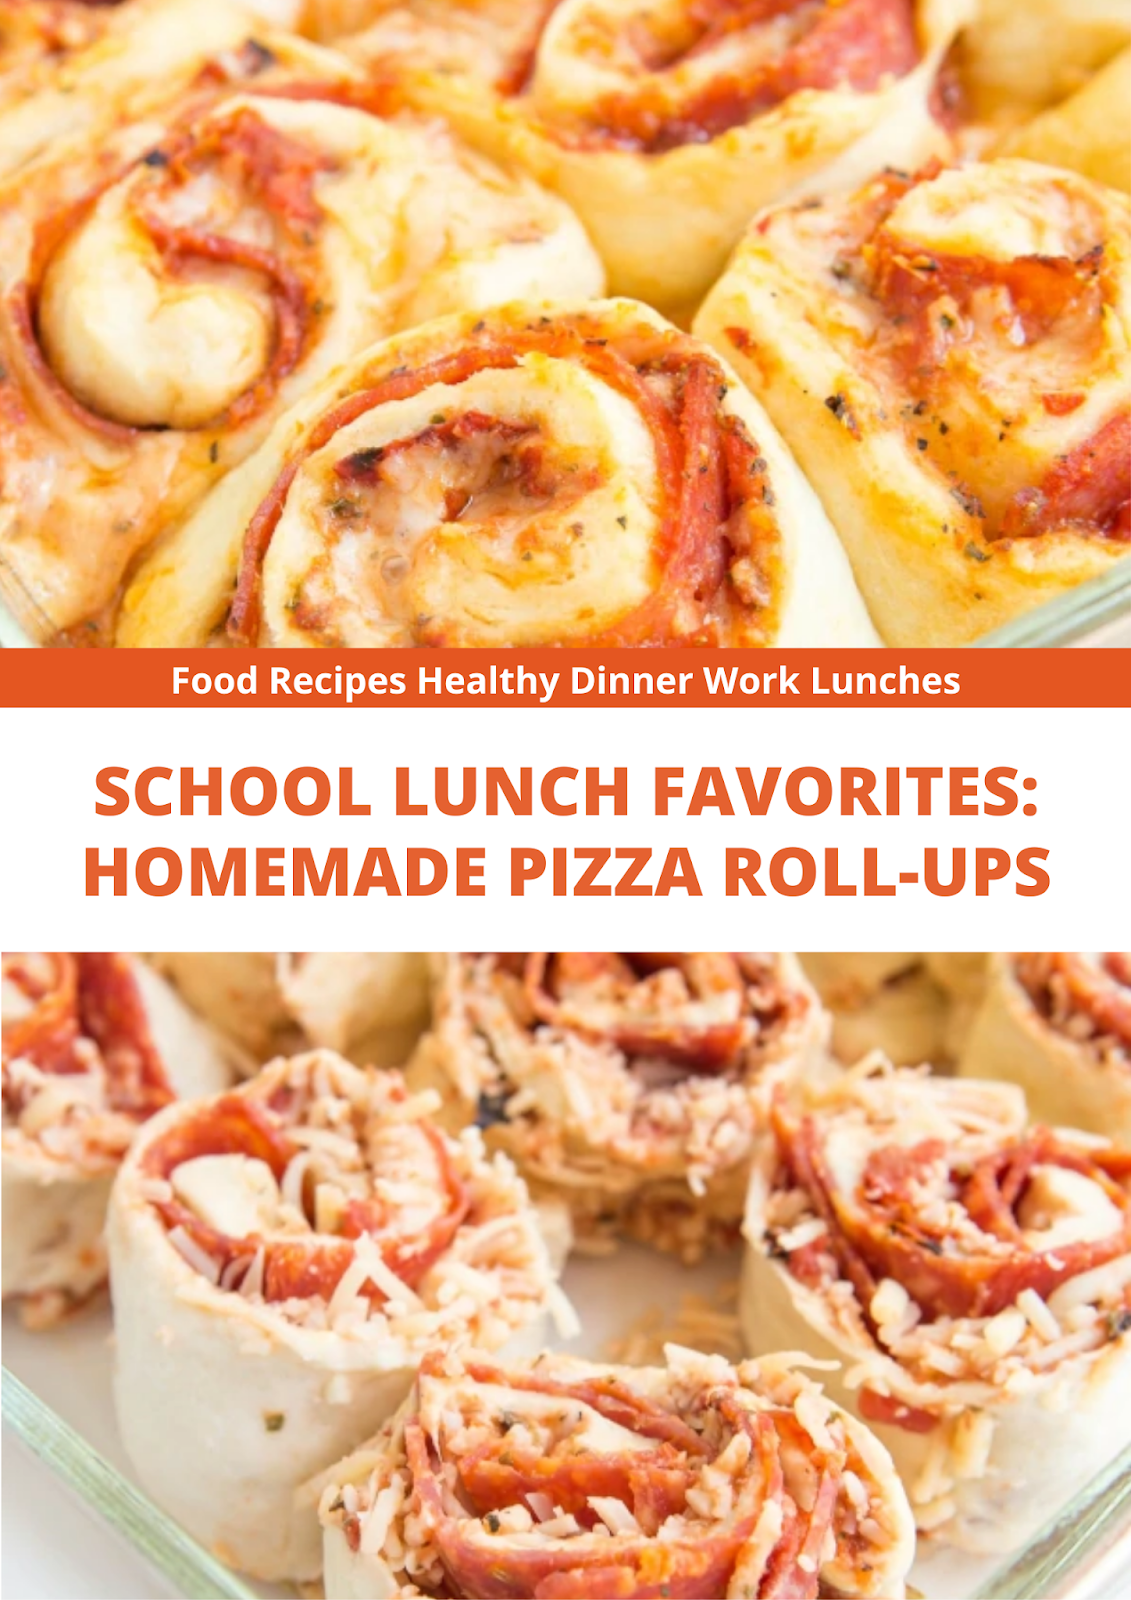 SCHOOL LUNCH FAVORITES: HOMEMADE PIZZA ROLL-UPS